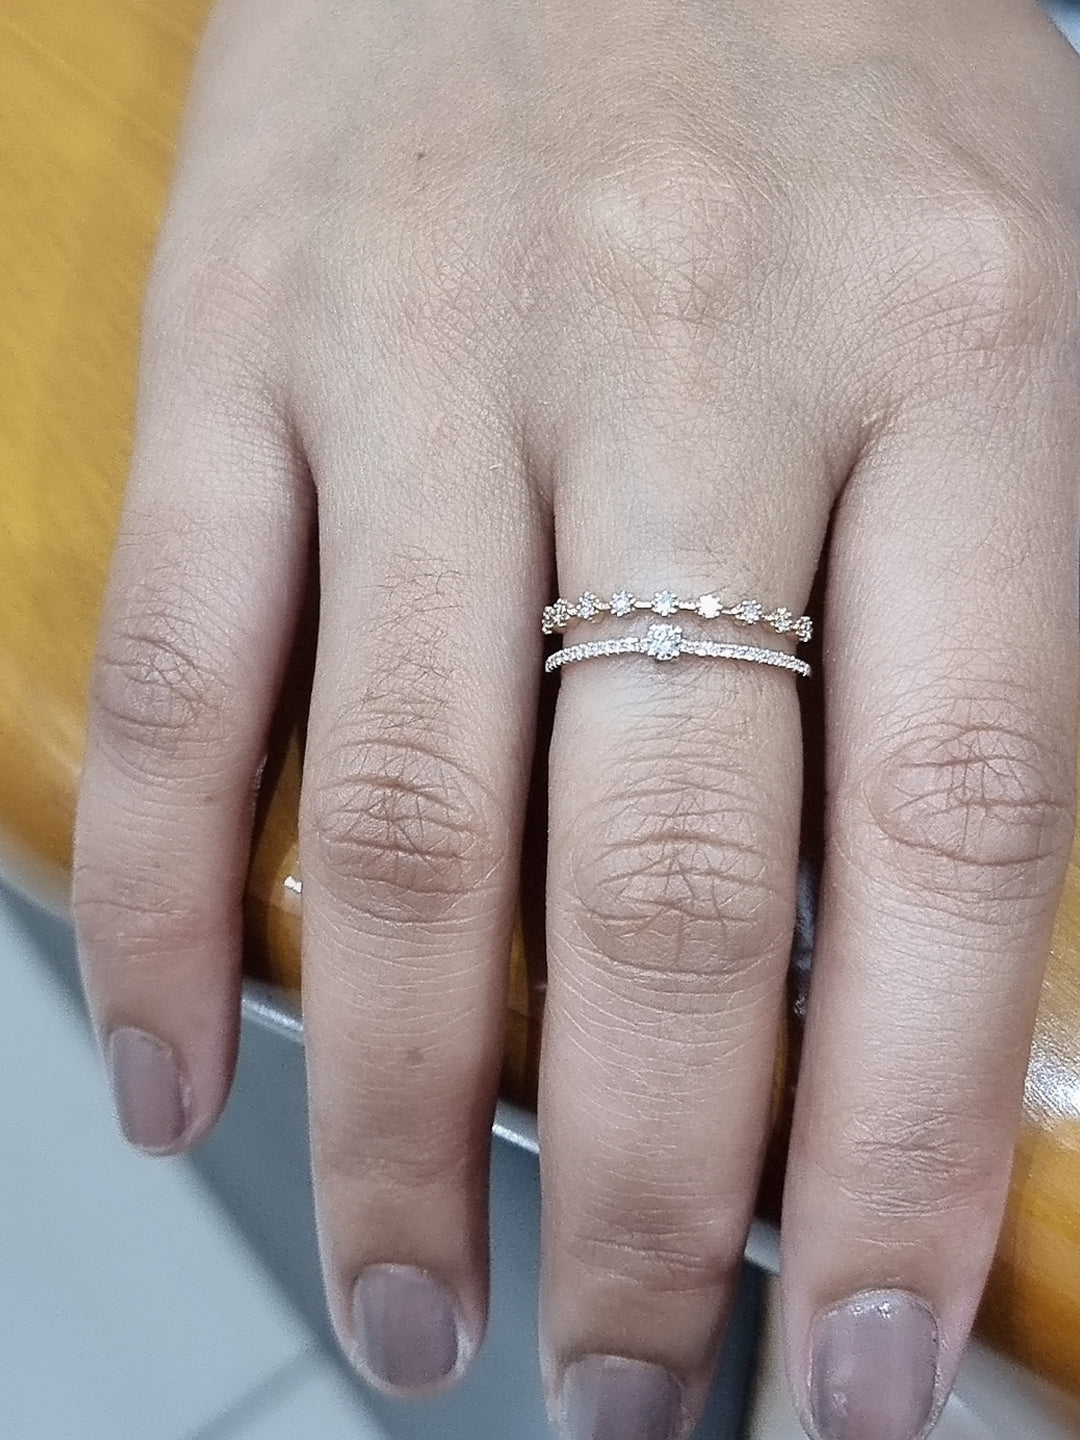 Petite Diamond Dress Ring Crafted in 18k Rose Gold